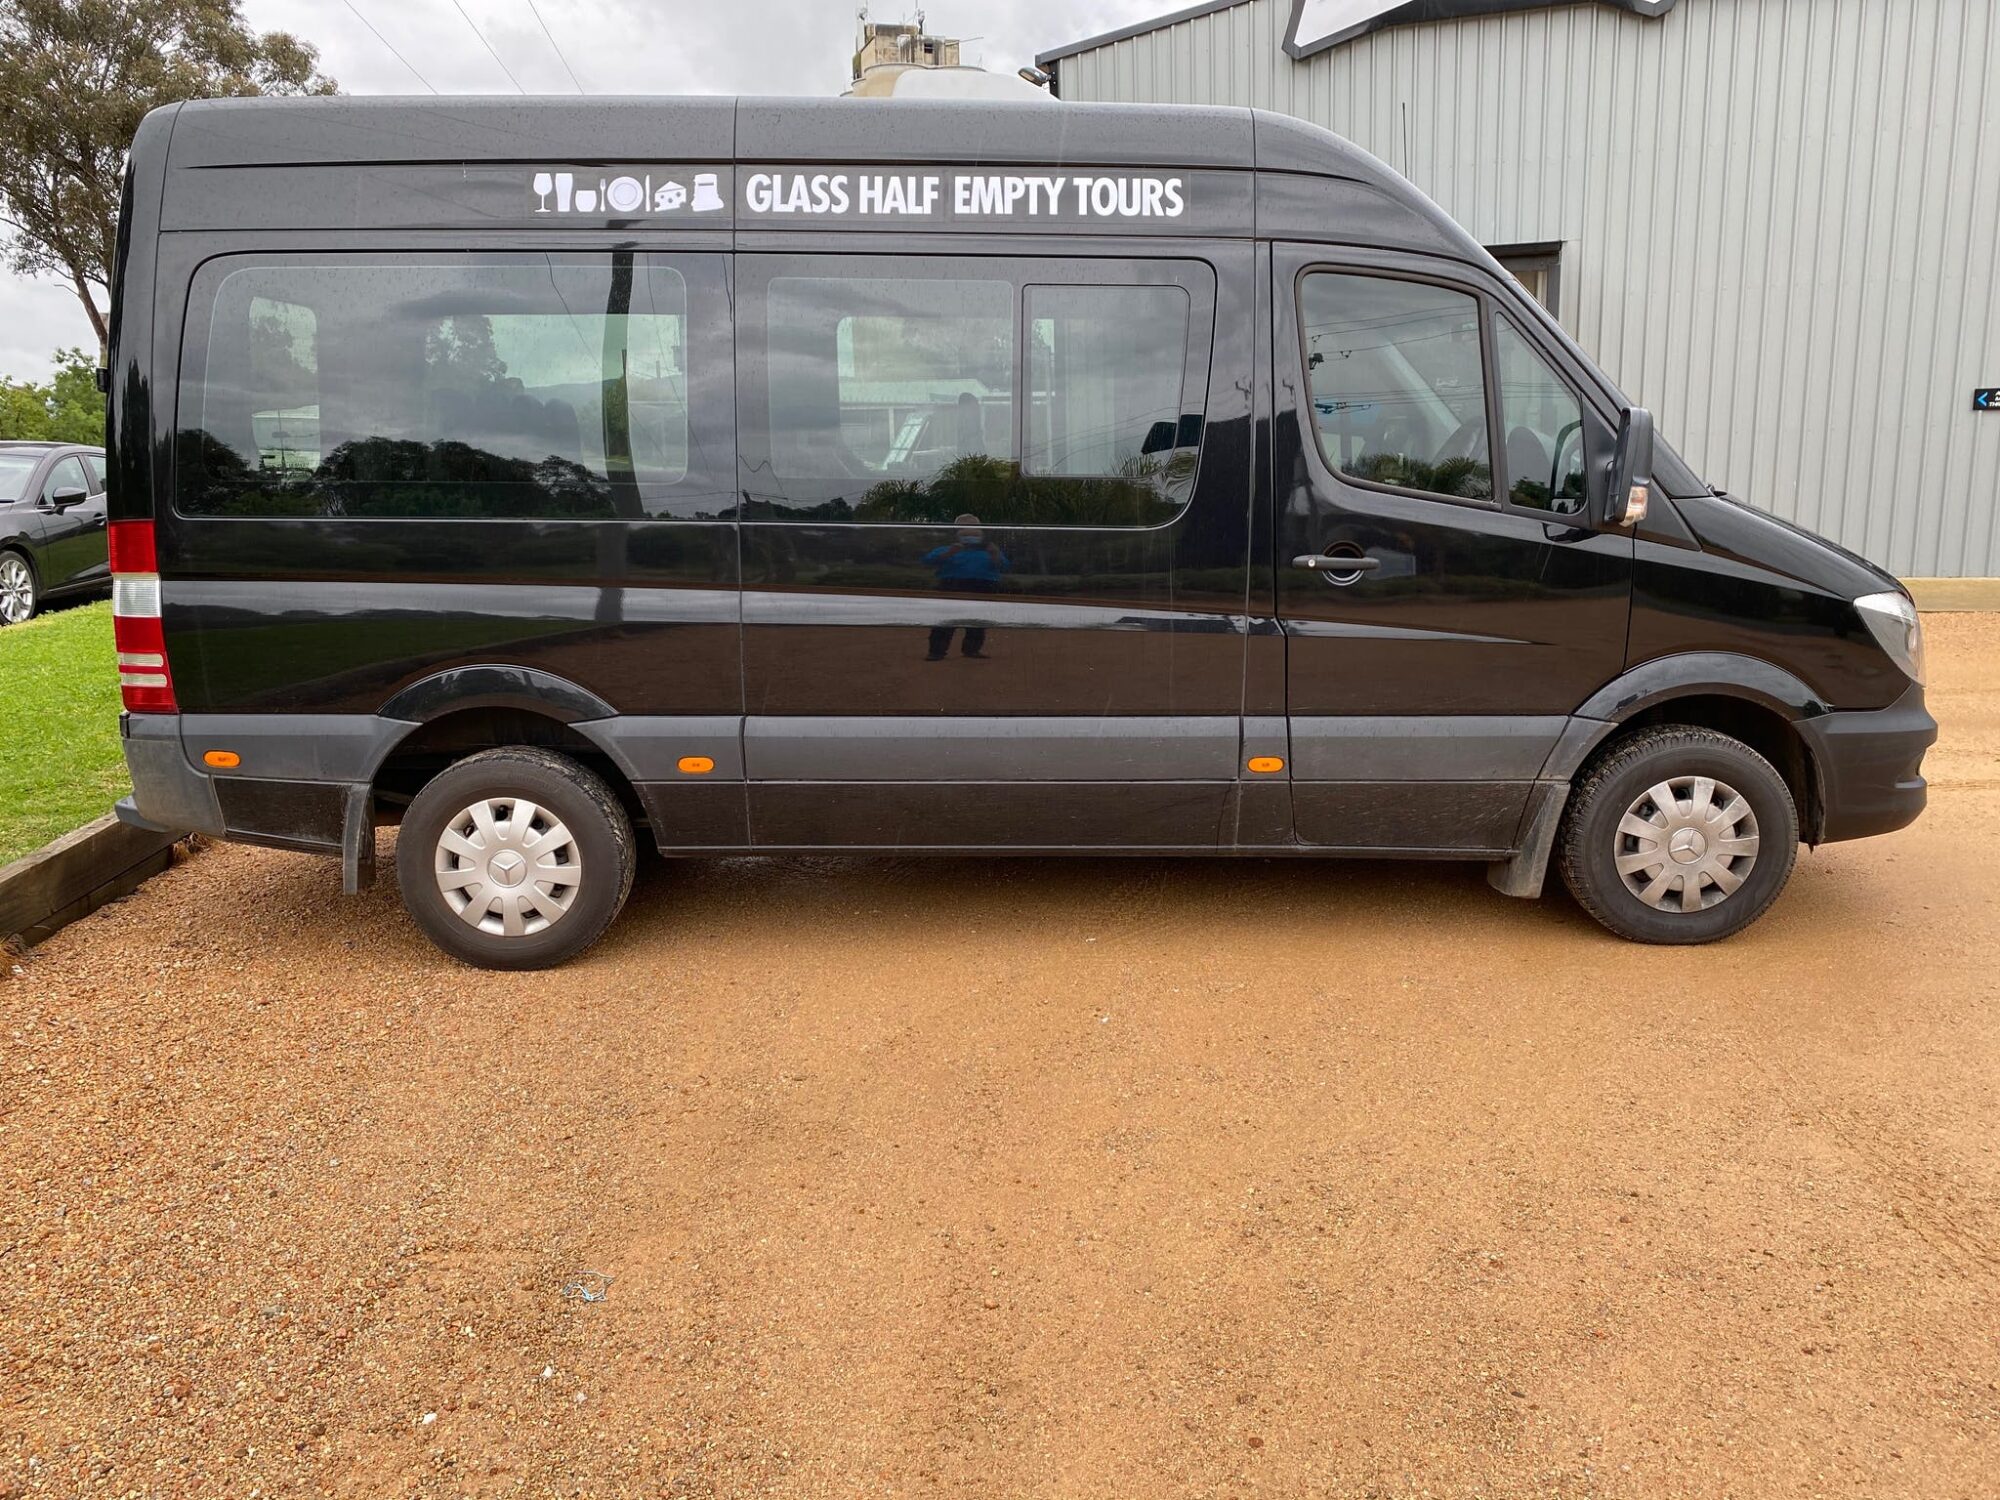 Tour bus, Mercedes Benz Sprinter, fully air conditioned, leather seats, individual seat